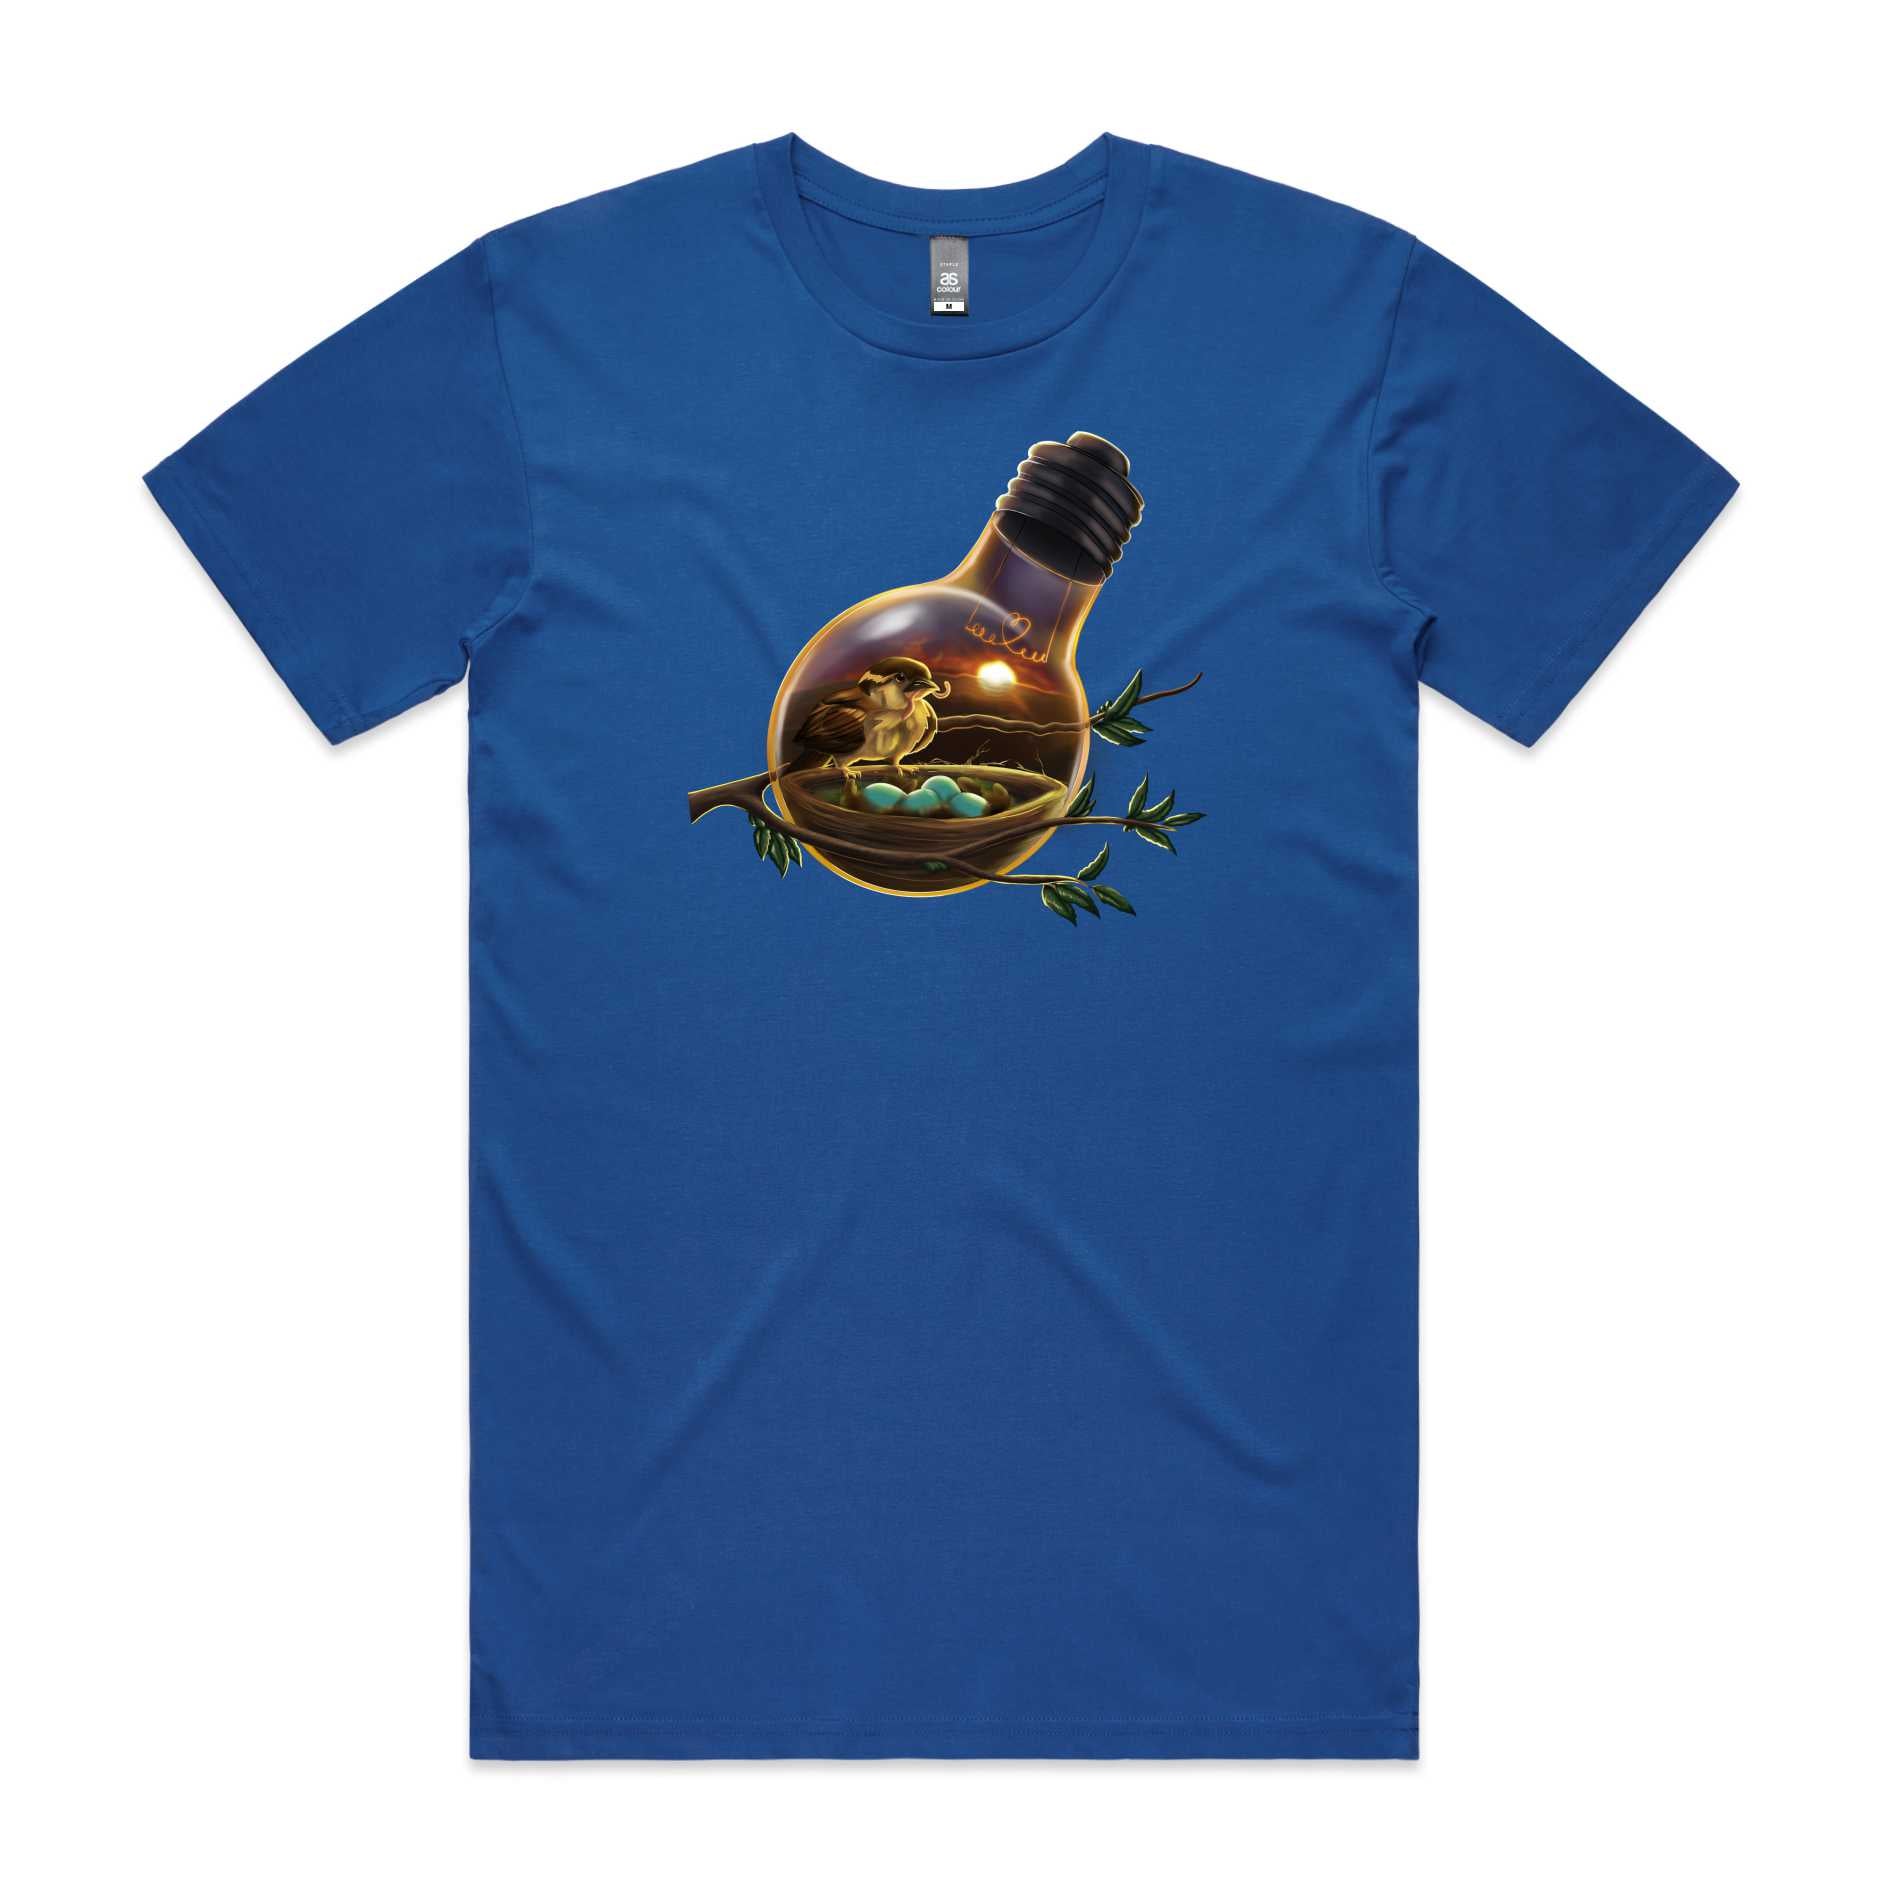 Sparrows World T-Shirt